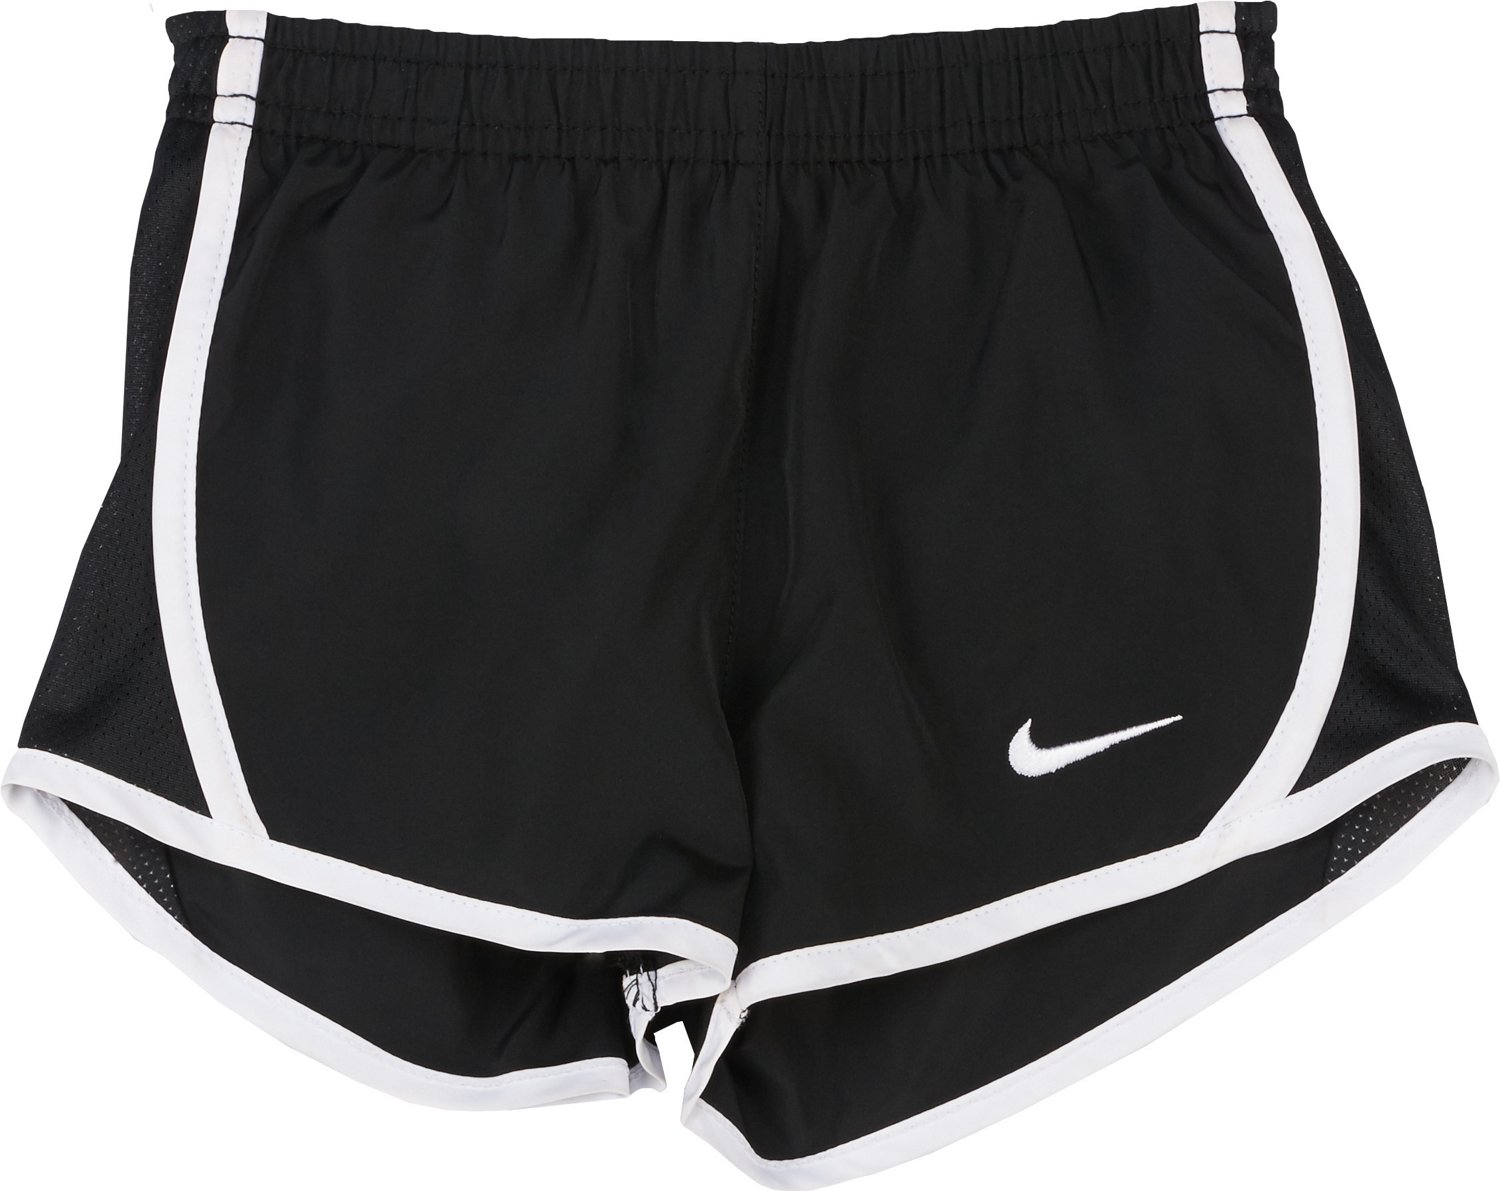 Nike Toddler Girls' 2T - 6X Dry Tempo Shorts | Academy